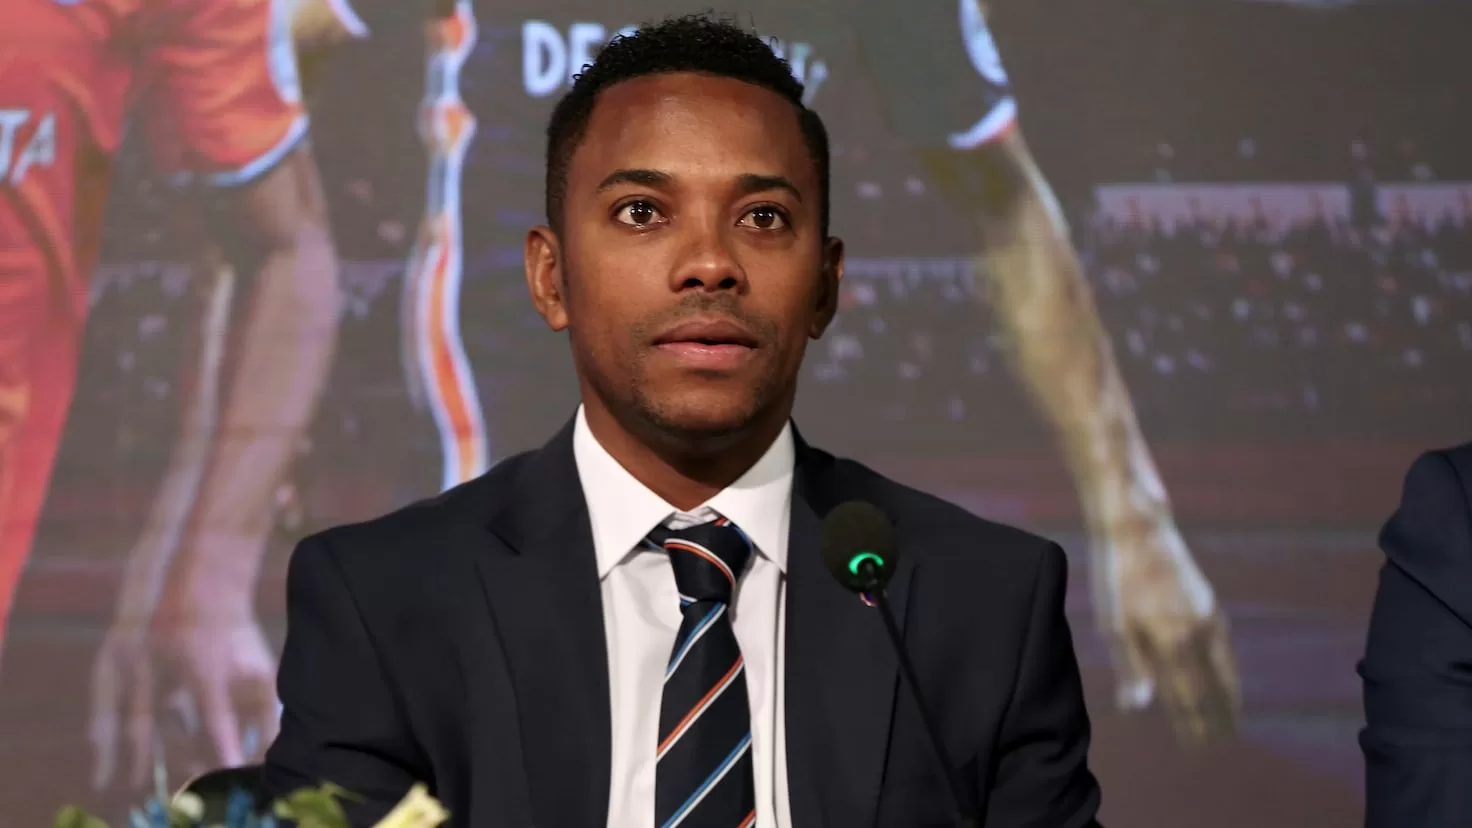 The judge asks that Robinho serve his sentence for rape in Italy in Brazil
